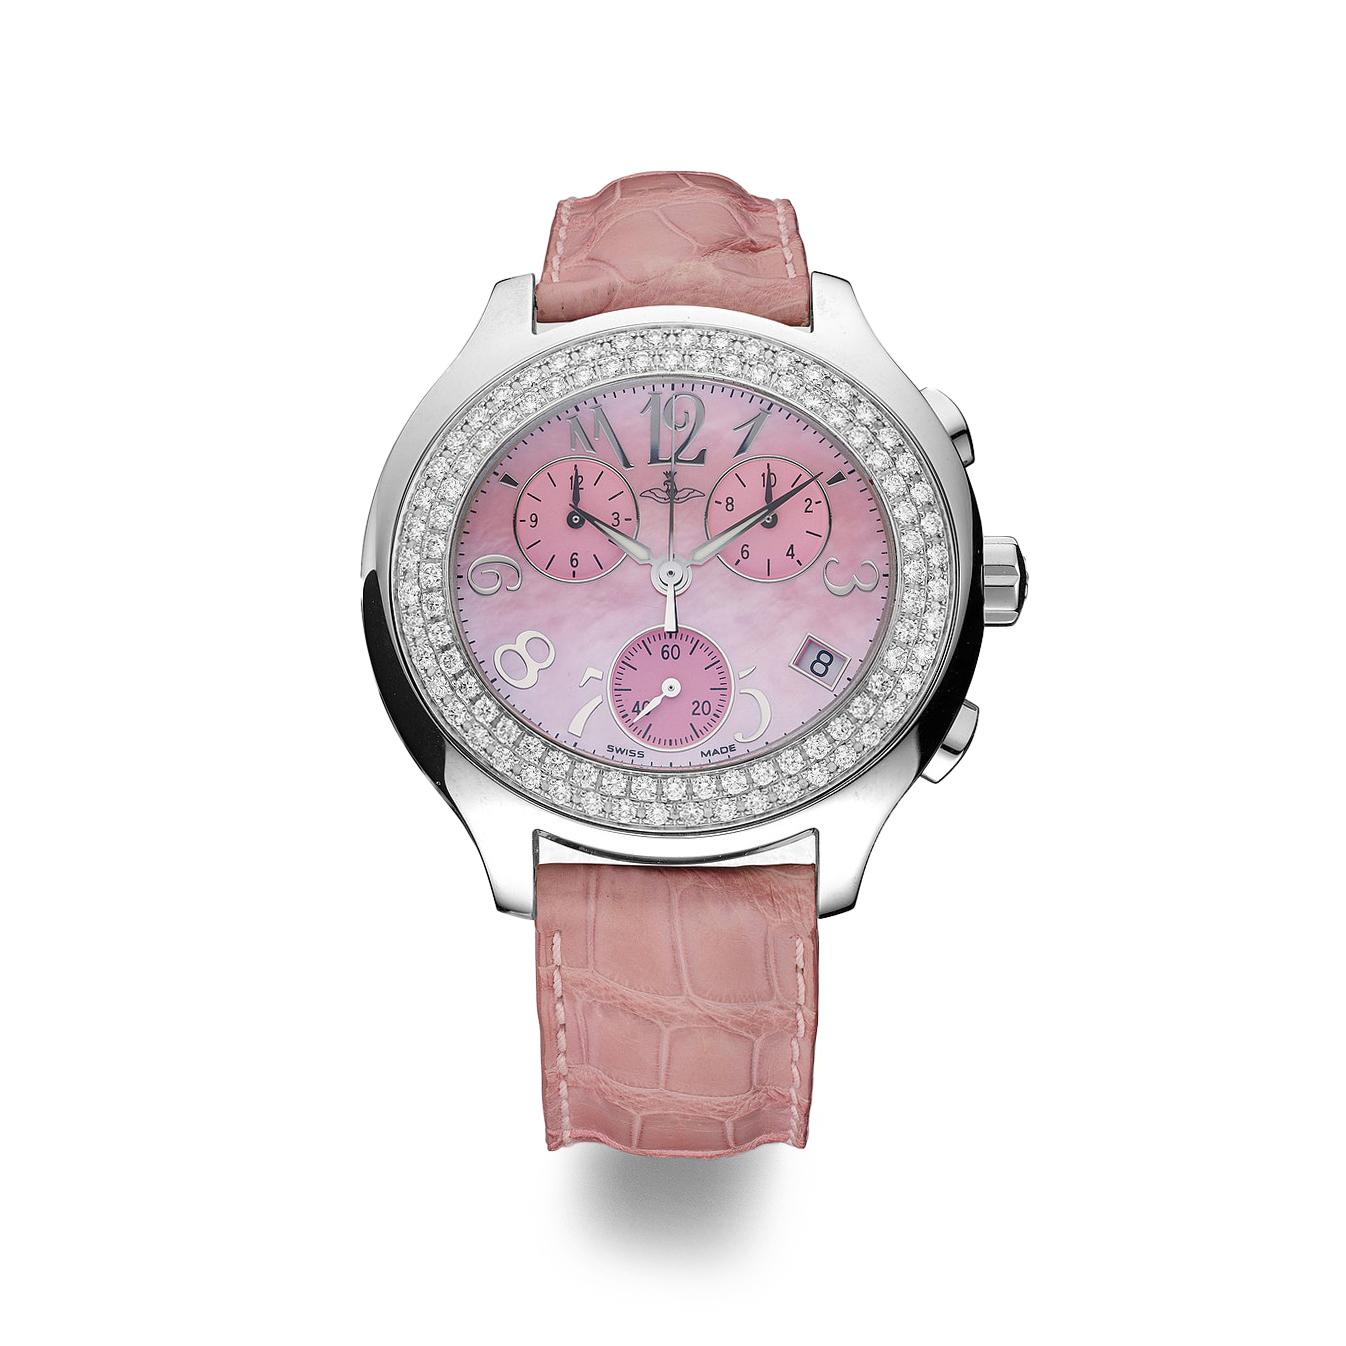 Chronograph watch in steel bezel set with 120 diamonds 1.70 cts pink mother of pearl dial, prong buckle alligator strap quartz movement.